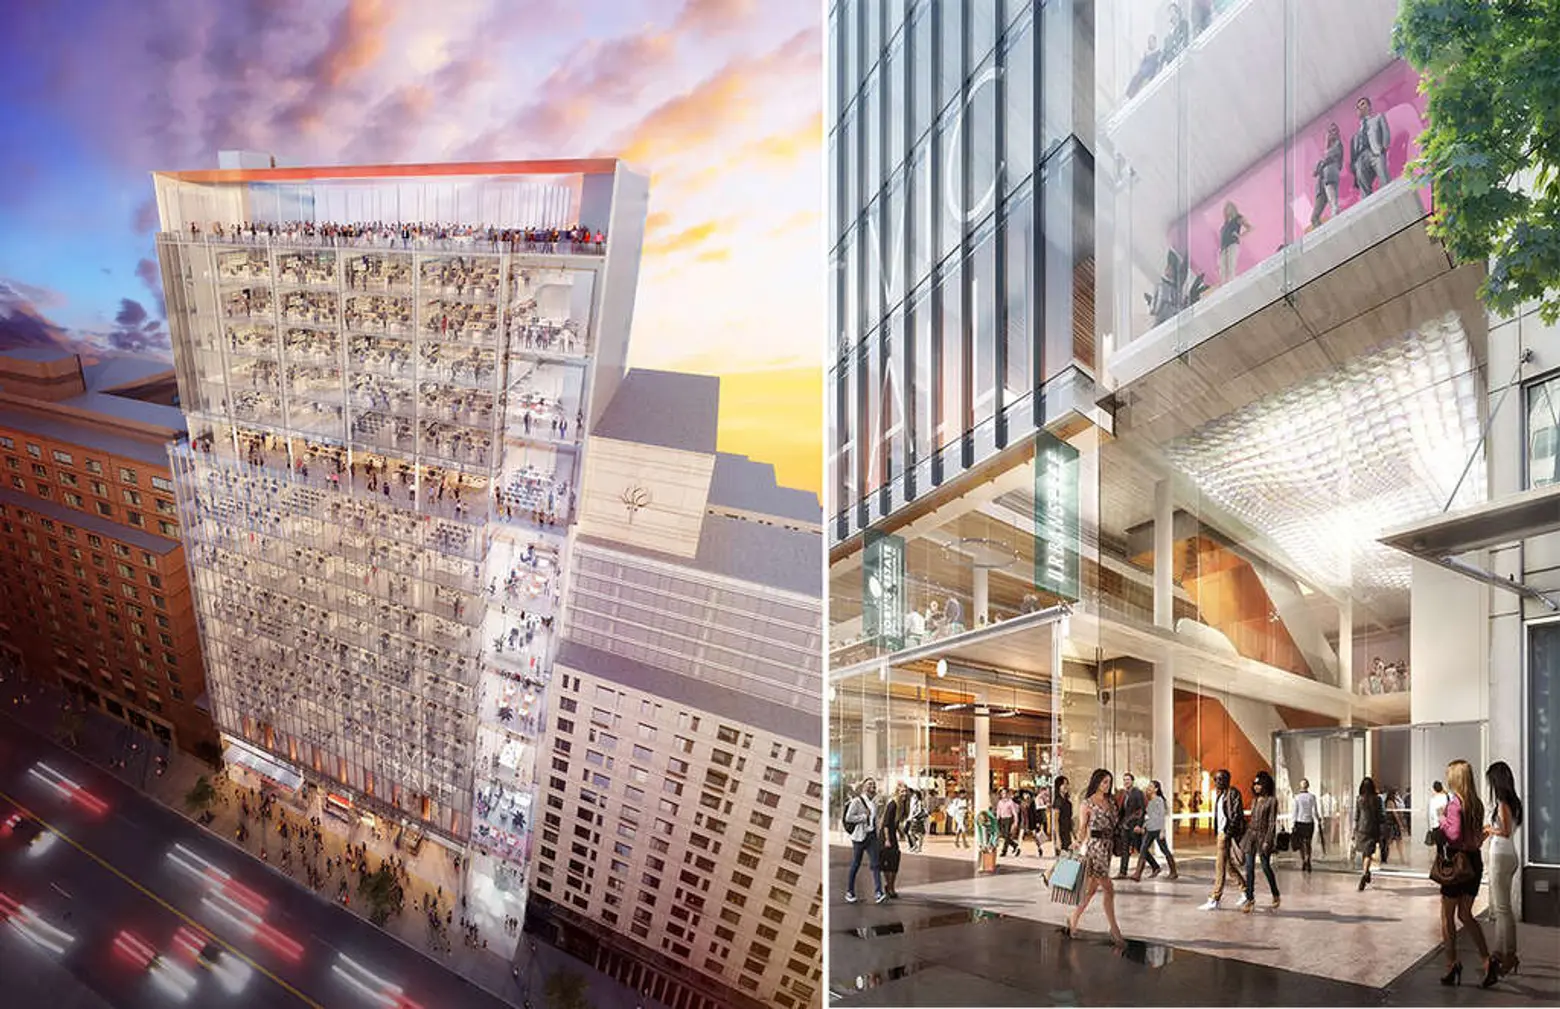 Permits filed for 22-story Union Square tech hub with plans for major digital training center